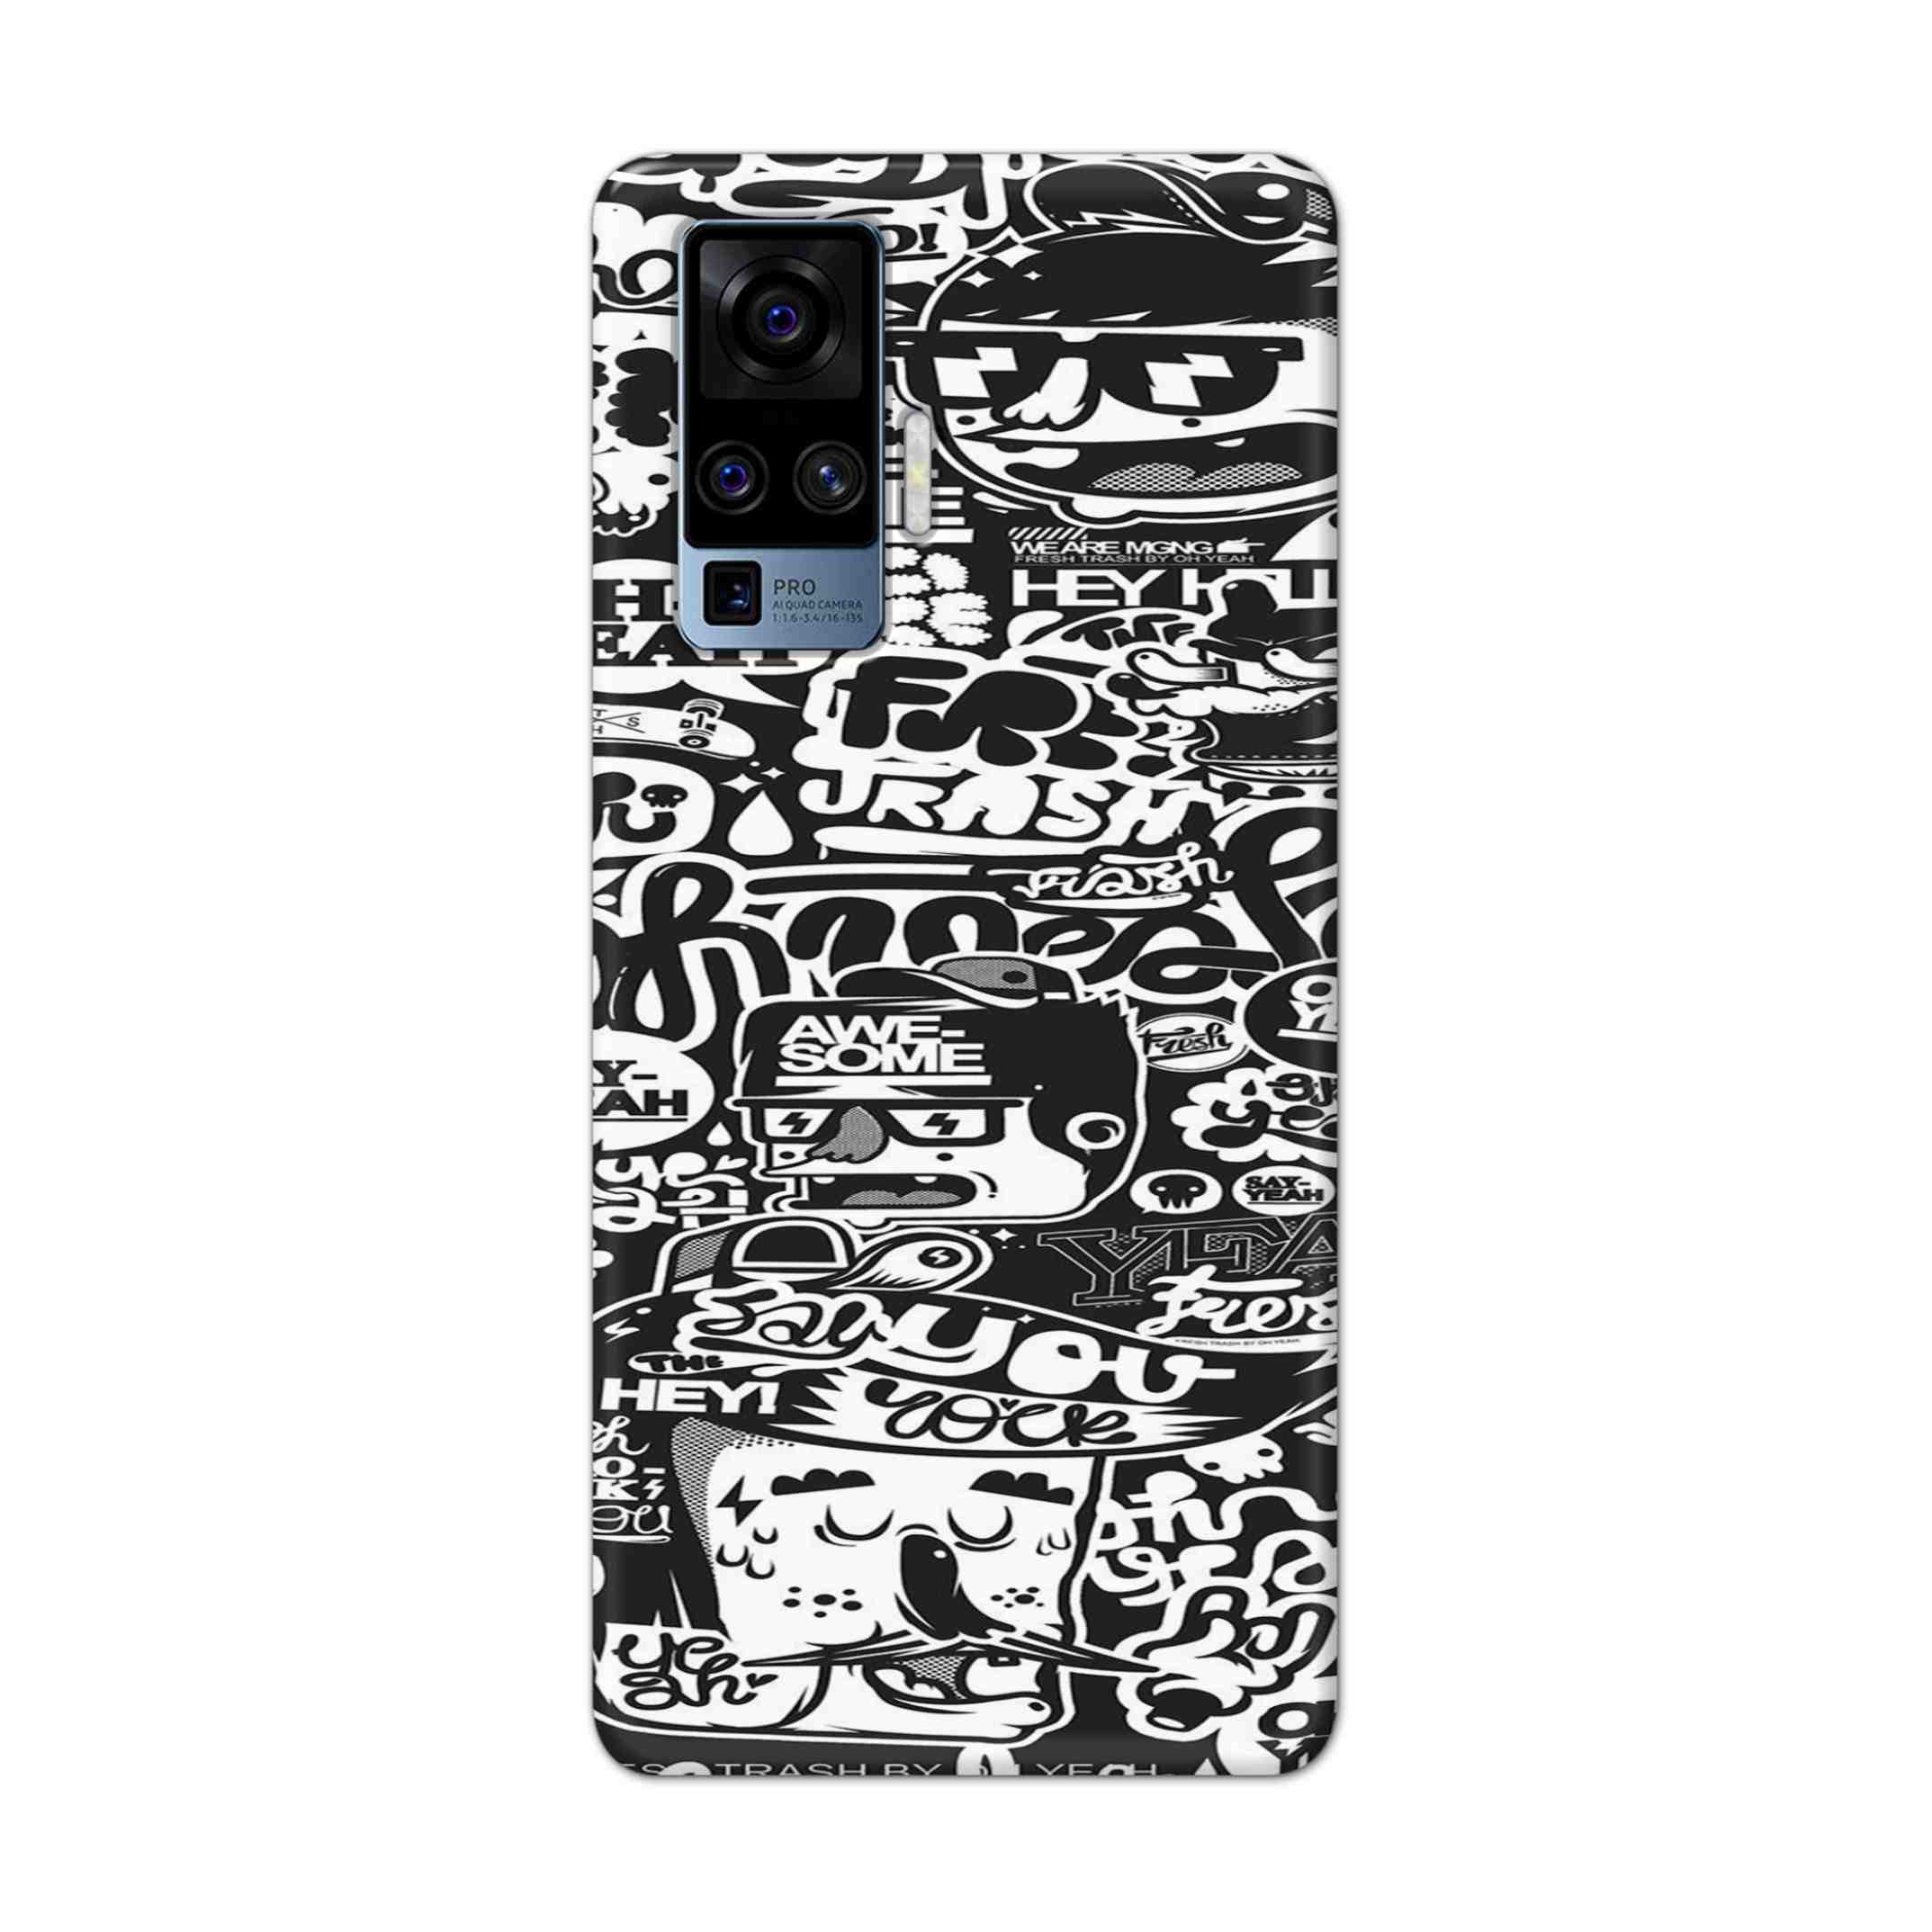 Buy Awesome Hard Back Mobile Phone Case/Cover For Vivo X50 Pro Online